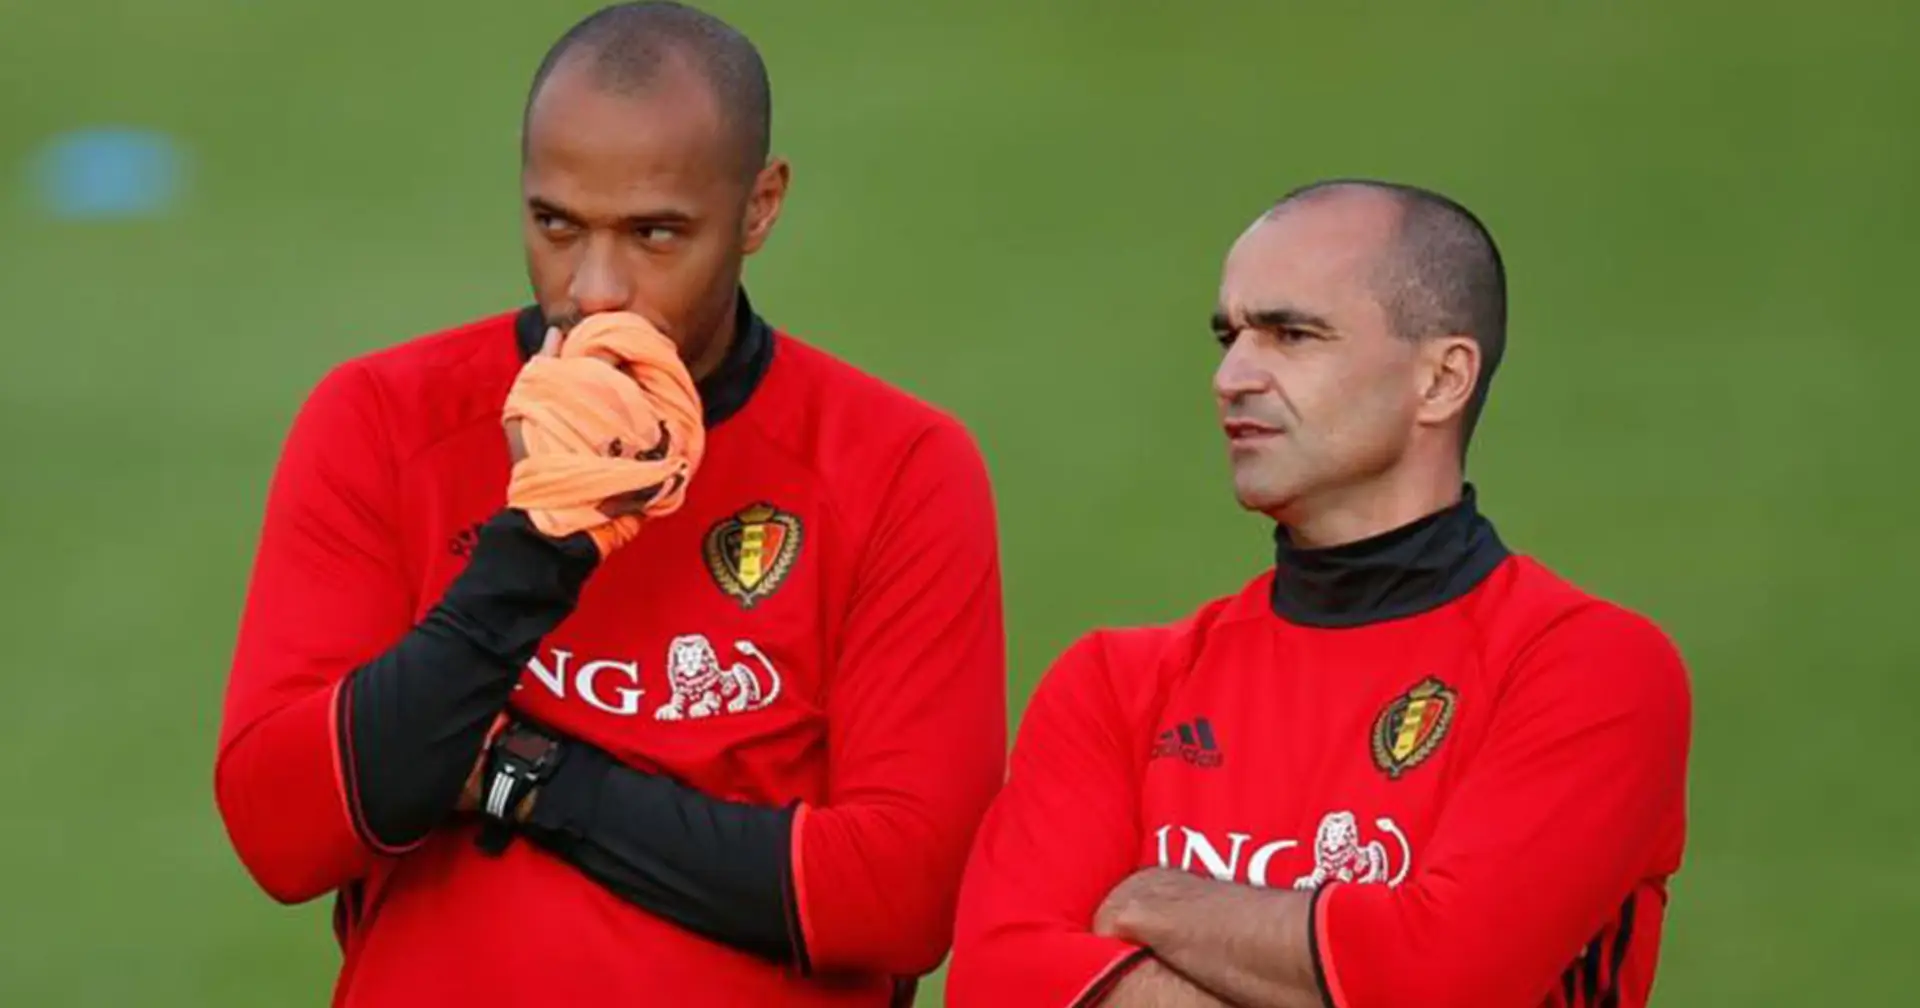 Imagine we get Roberto Martinez and Thierry Henry as his assistant coach – would you like to see this duo at Barca? Why/why not?